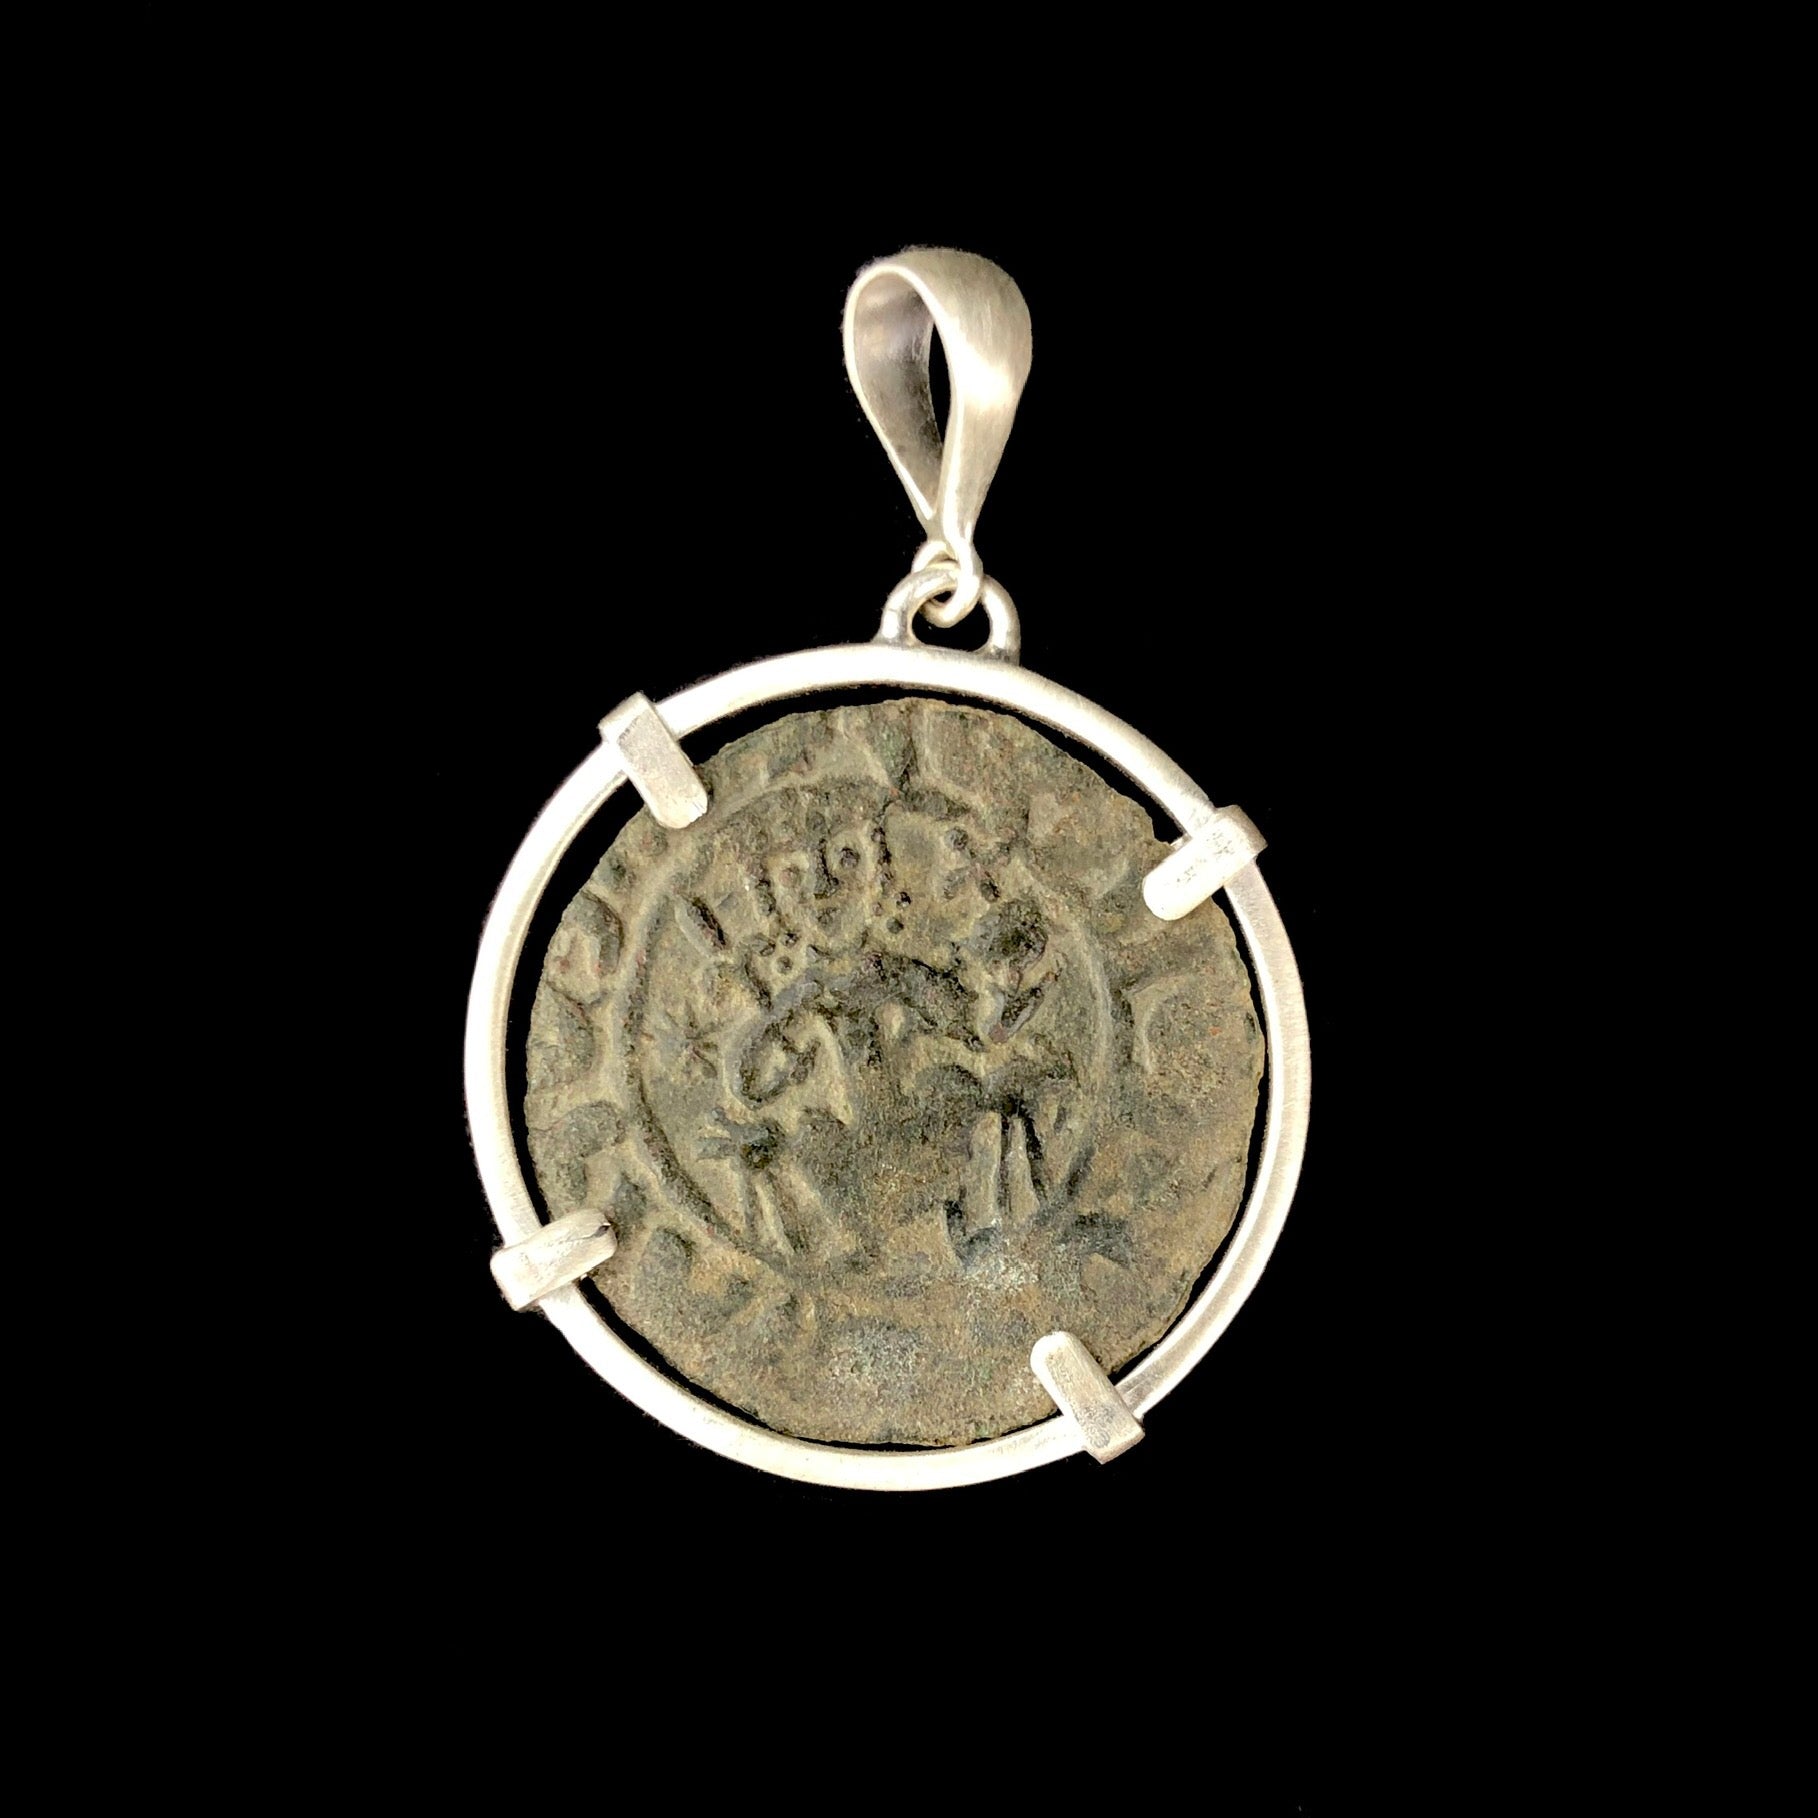 Human Figure in Center of Crusader Coin Pendent 